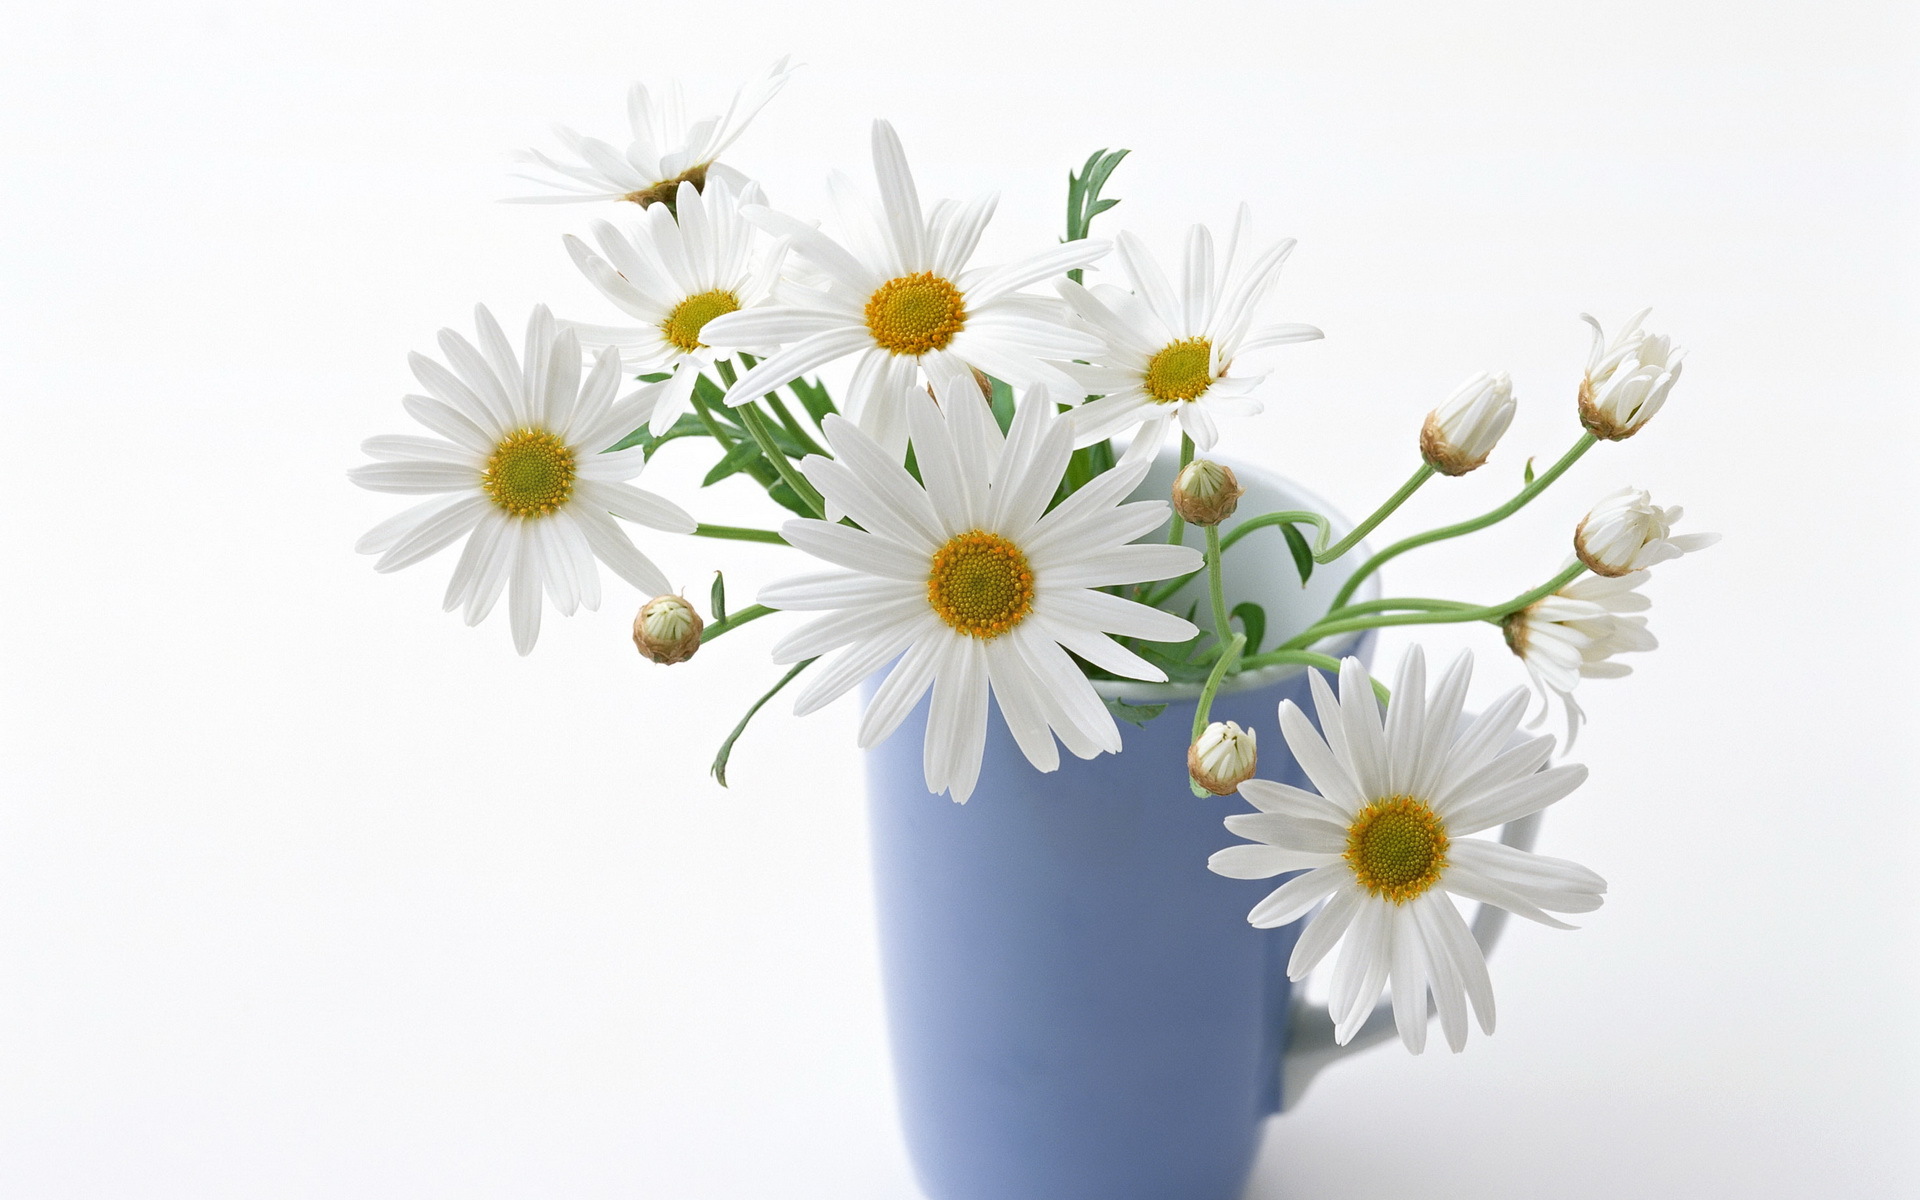 plants, bouquets, flowers, cups, camomile phone background